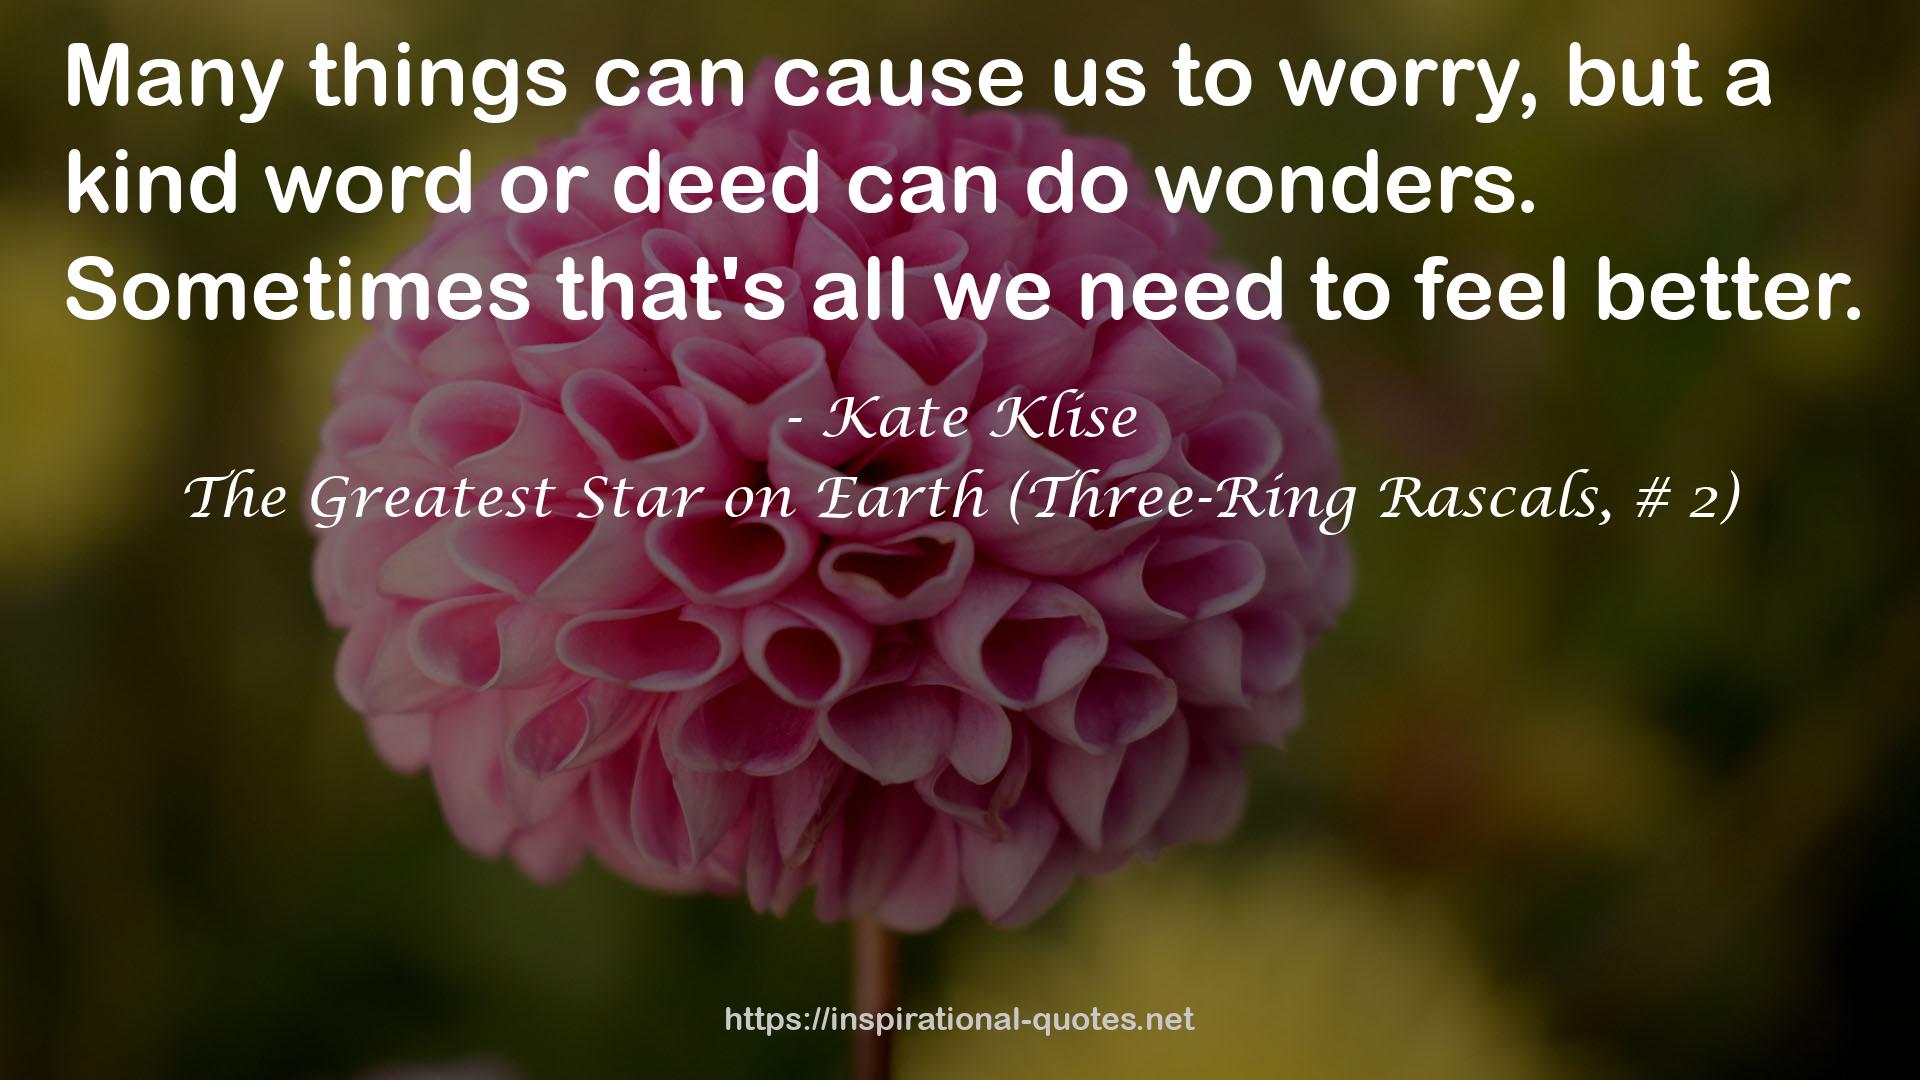 The Greatest Star on Earth (Three-Ring Rascals, # 2) QUOTES